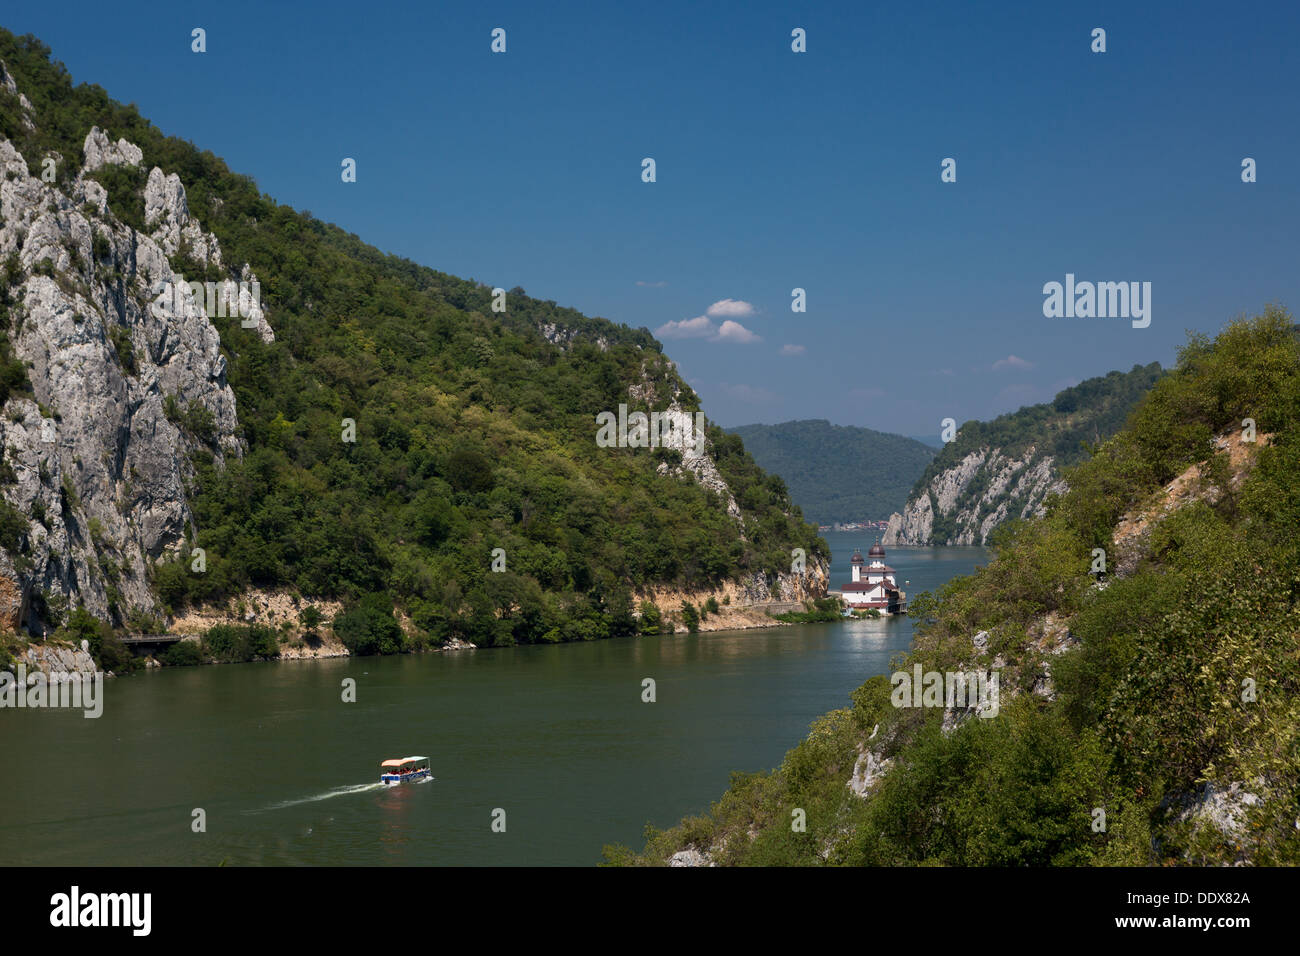 Danube Gorges landscape with a boat sailing towards the Mraconia monastery Stock Photo